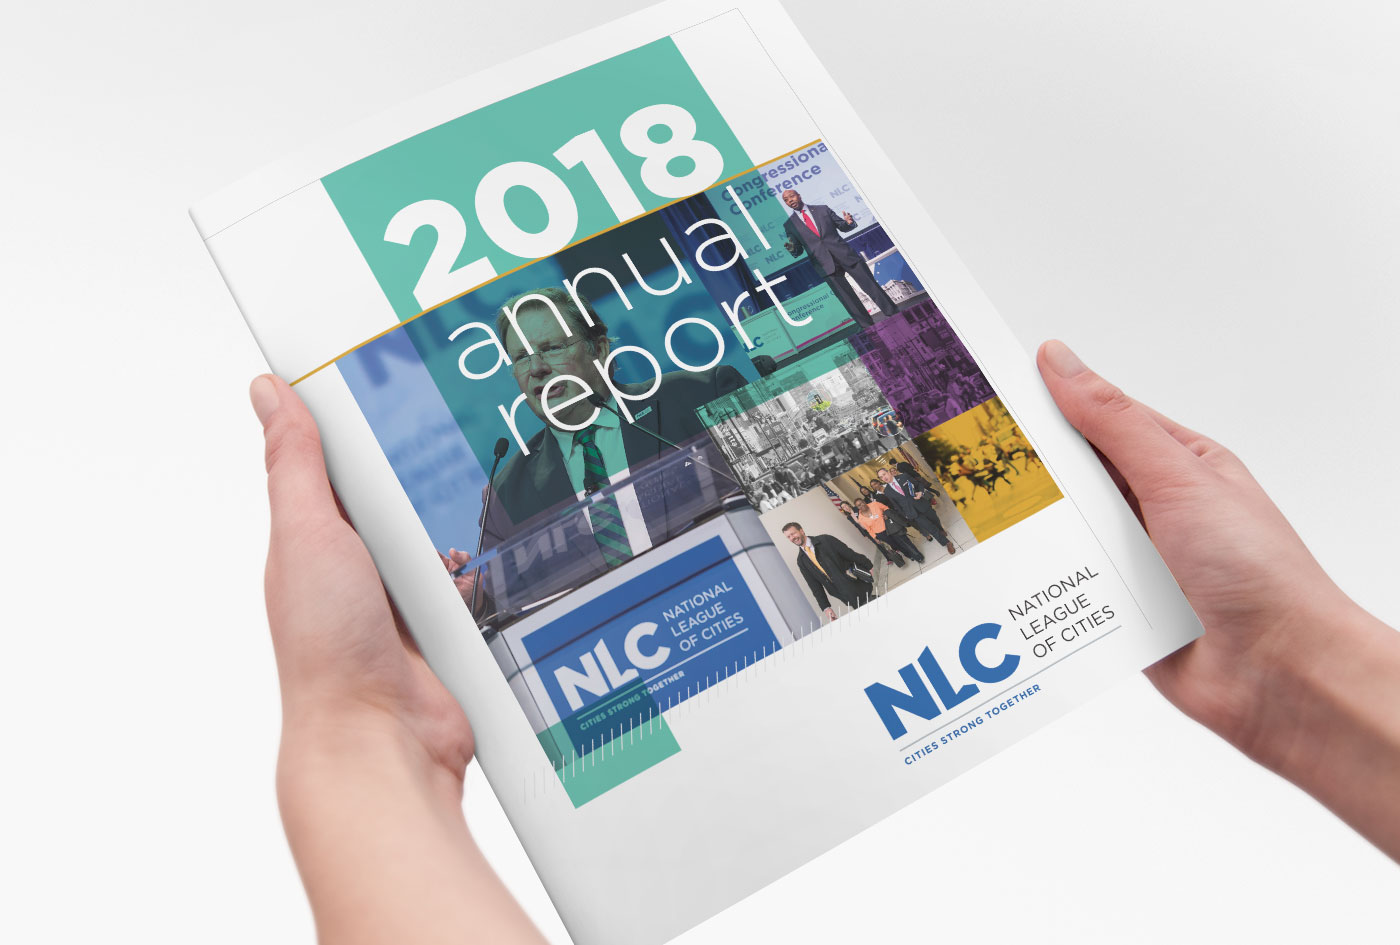 National League of Cities 2018 Annual Report